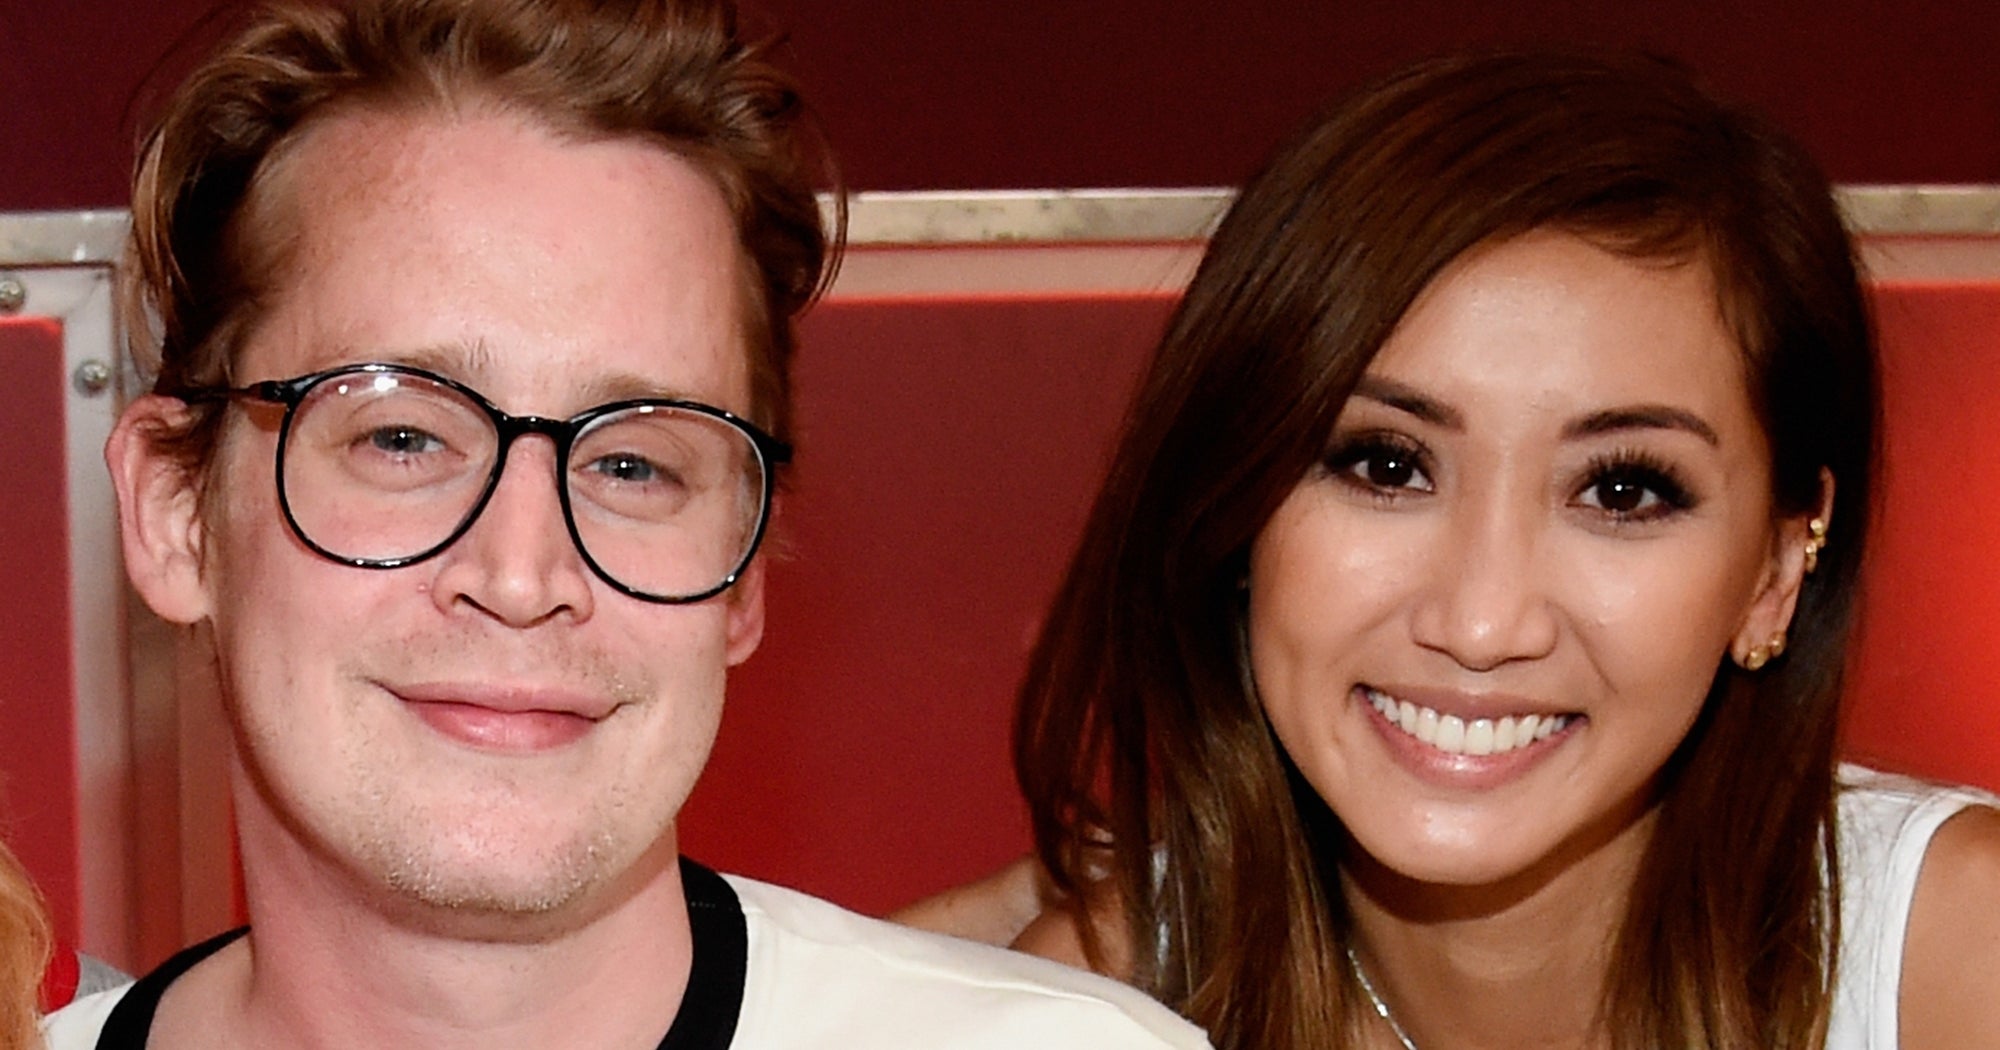 ★Macaulay Culkin and Brenda Song Quietly Welcome Their First Baby★